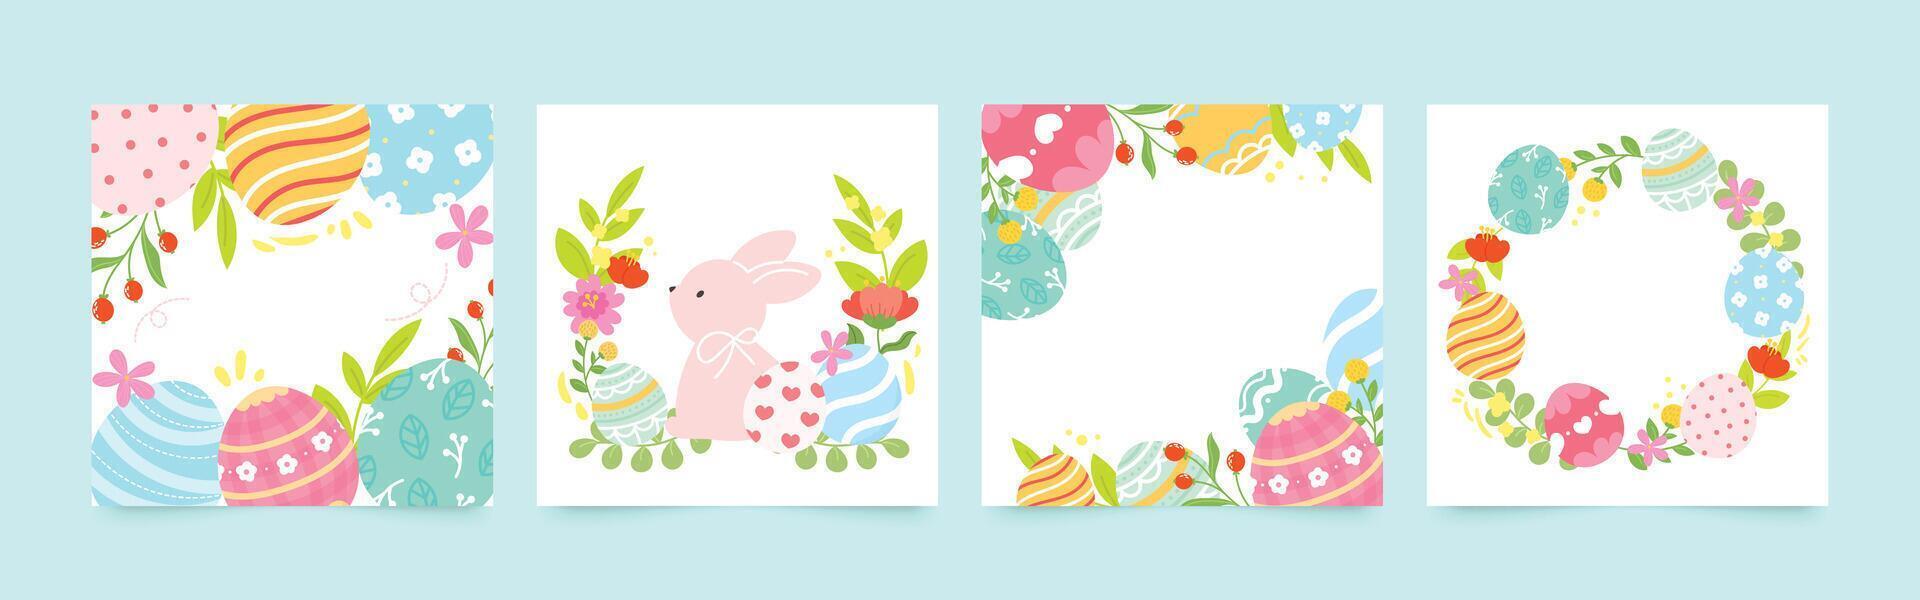 Happy Easter square cover vector set. Adorable doodle design with easter egg, rabbit, flower, foliage on white background. Spring season background for prints, wallpaper, packaging, ads.